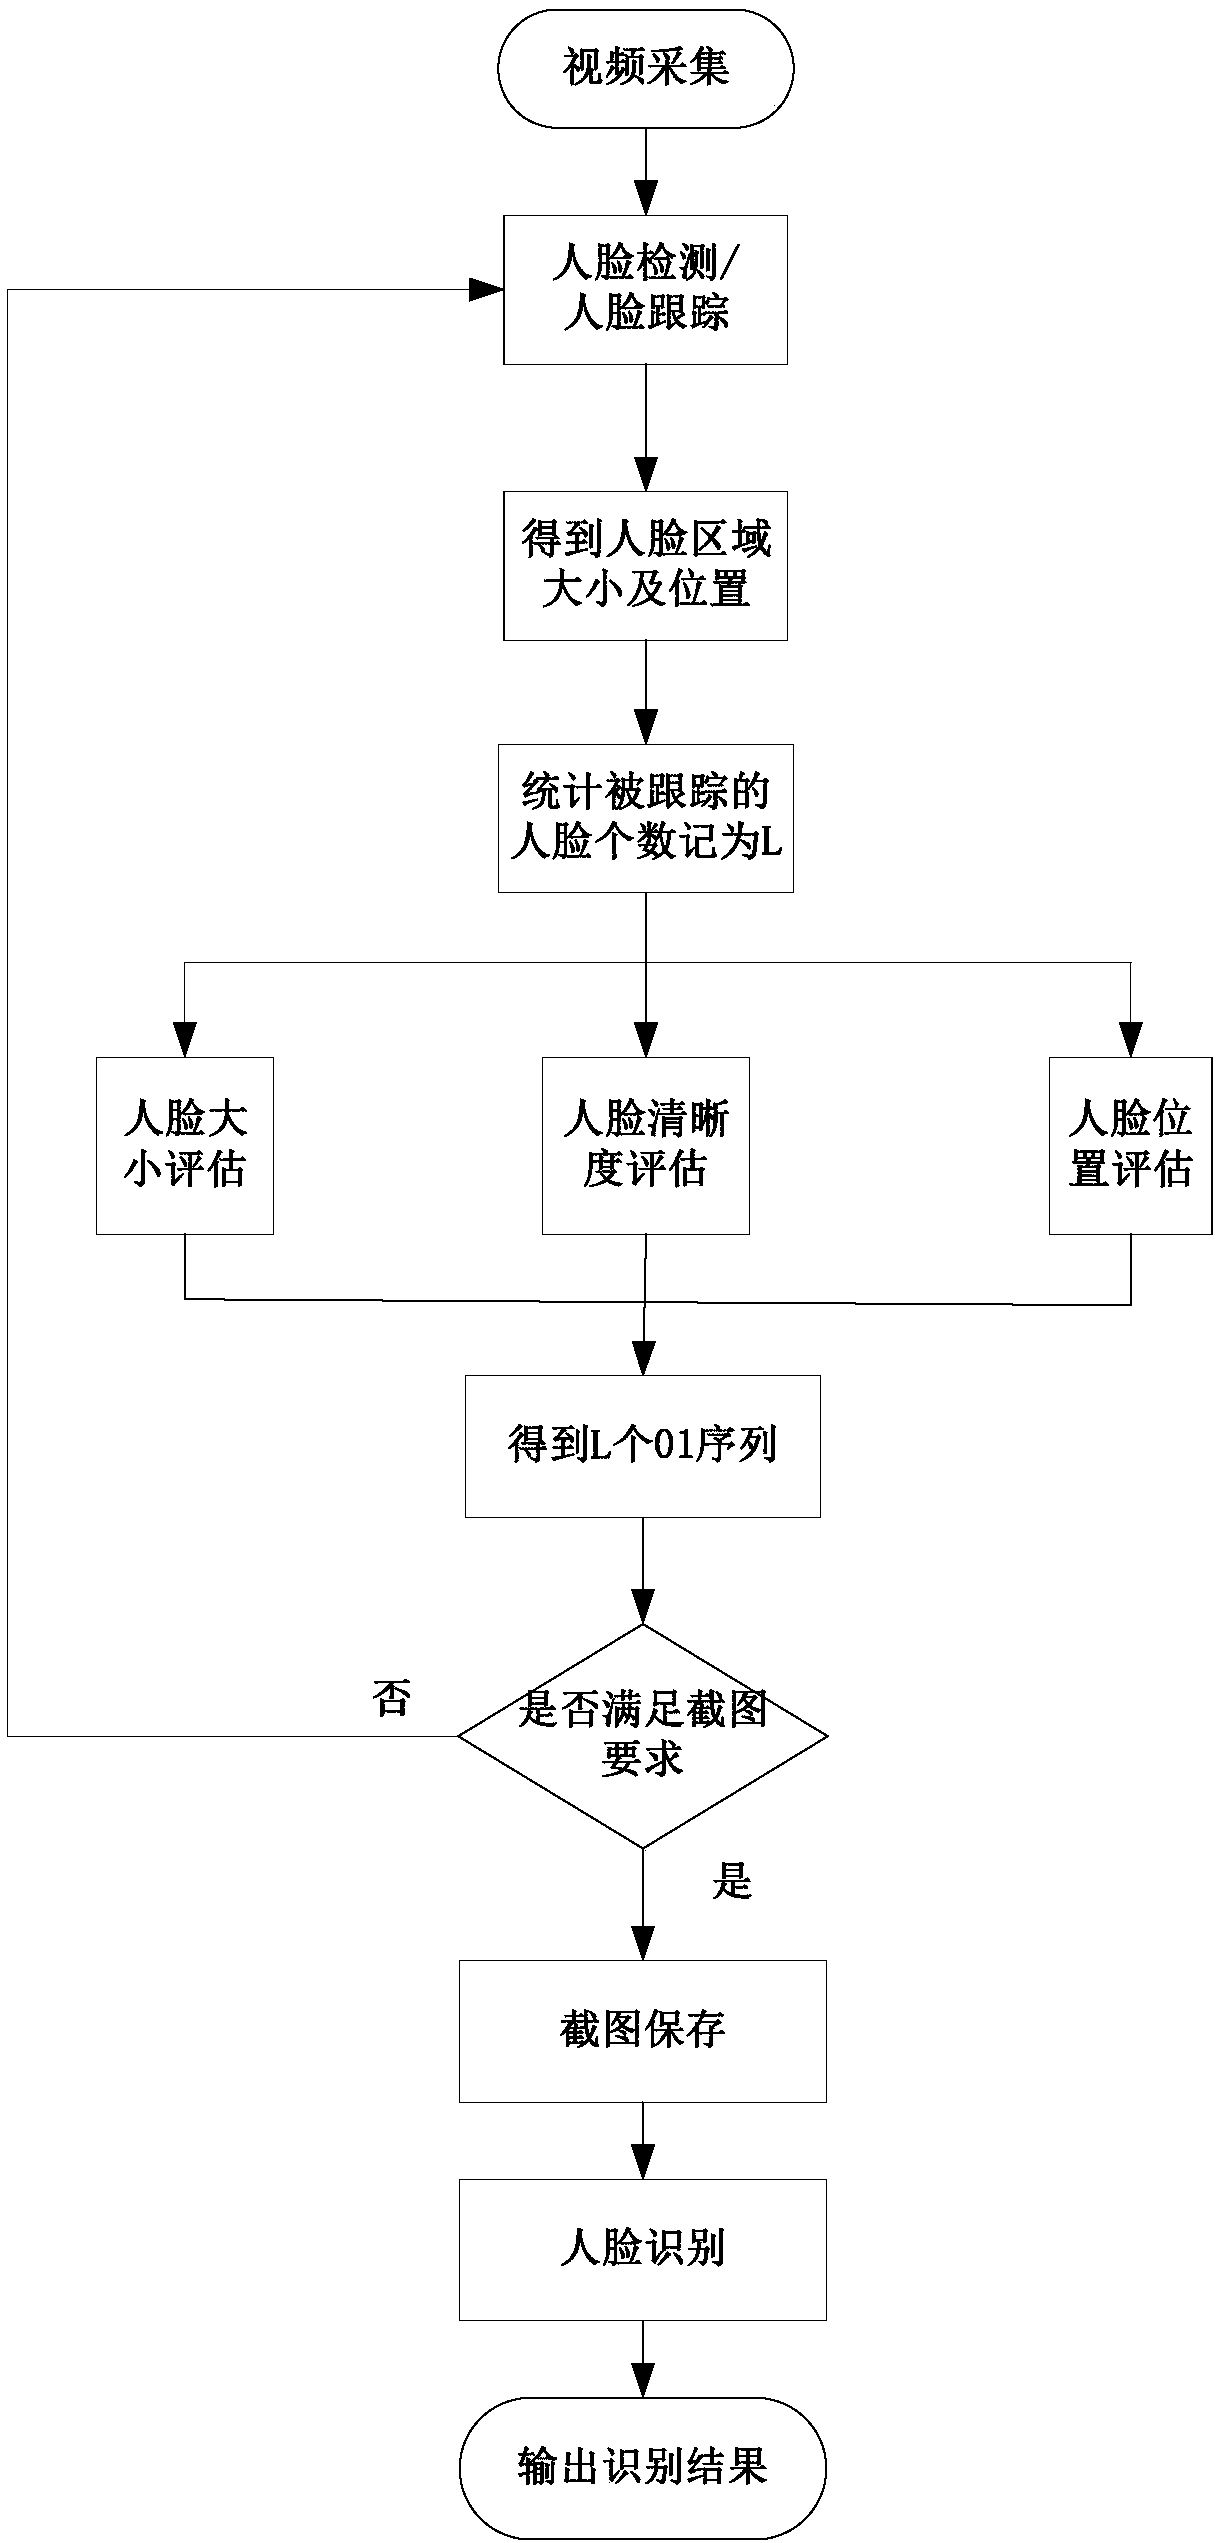 Multi-person close-up real-time recognition and automatic screenshot method for large live broadcasting scene